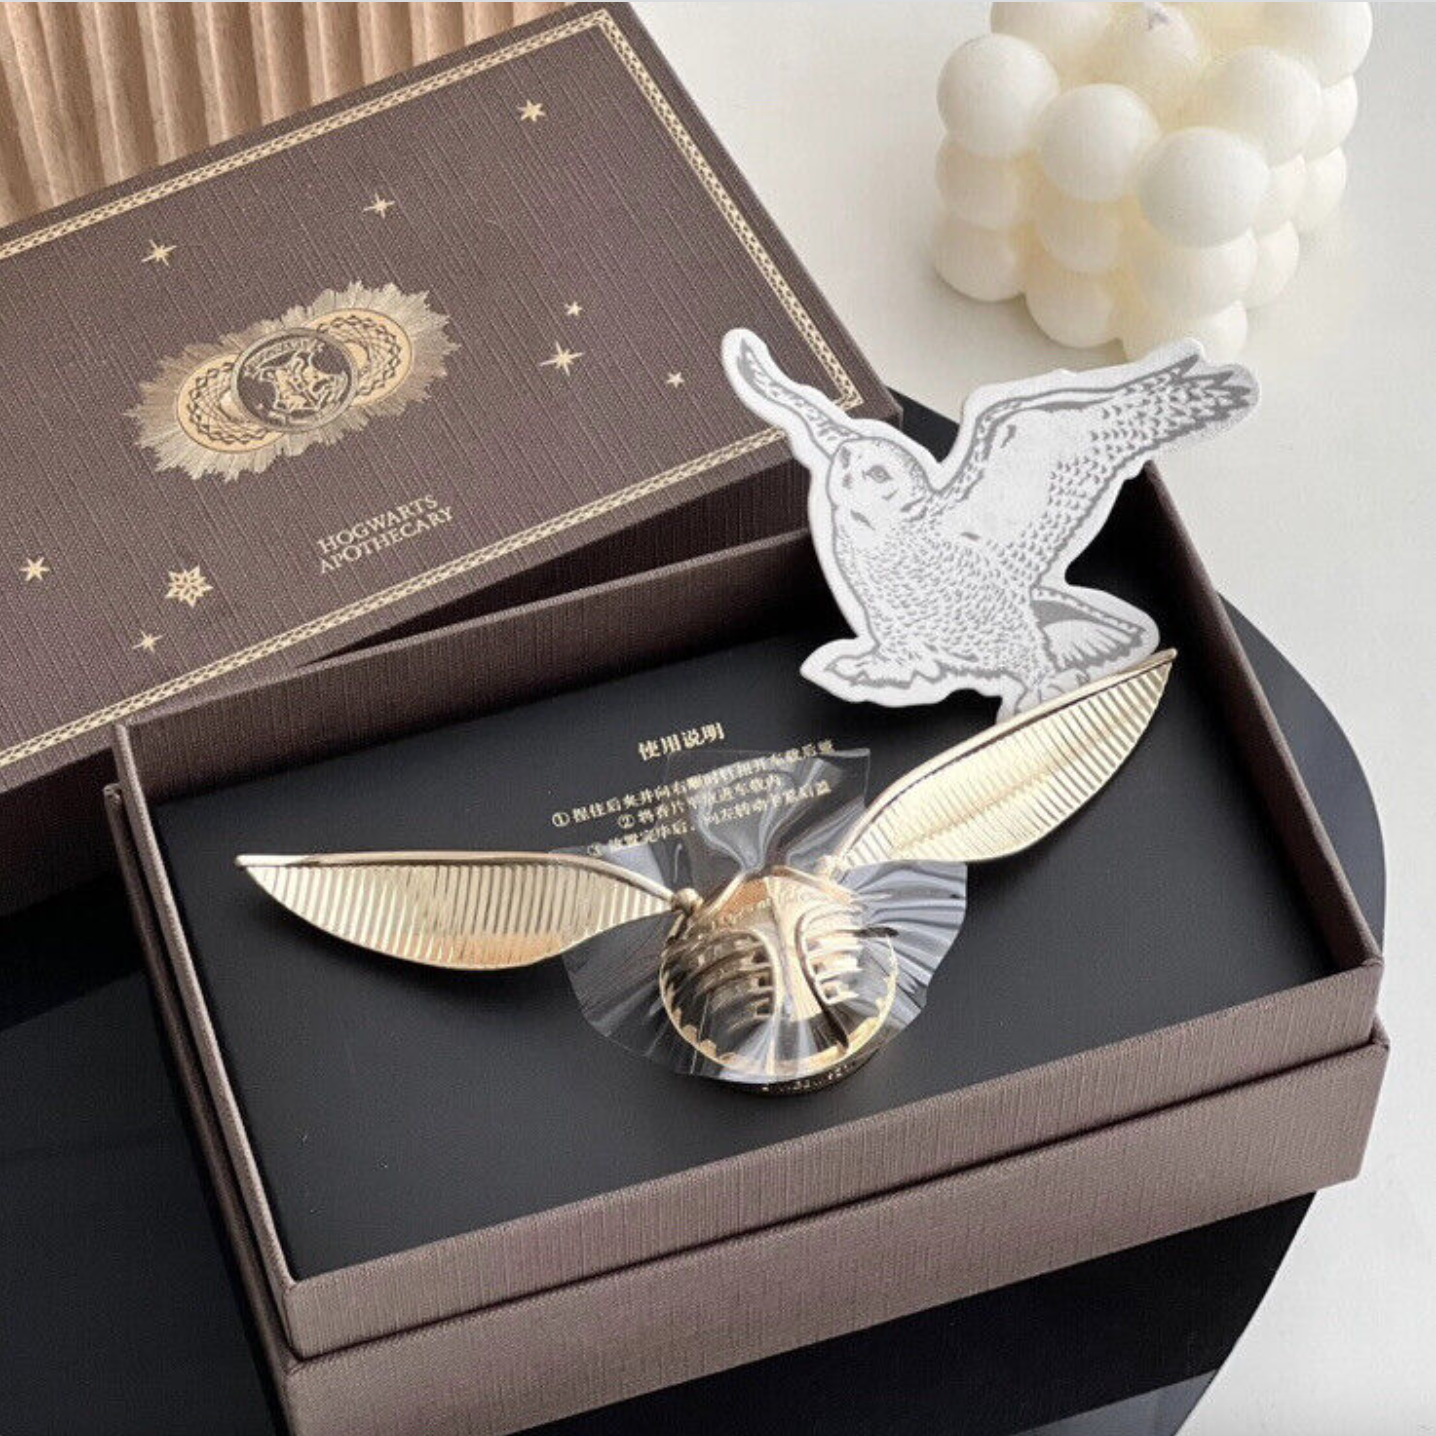 HARRY POTTER Levitating GOLDEN SNITCH Sculpture  Harry potter items, Harry  potter cosplay, Harry potter accessories